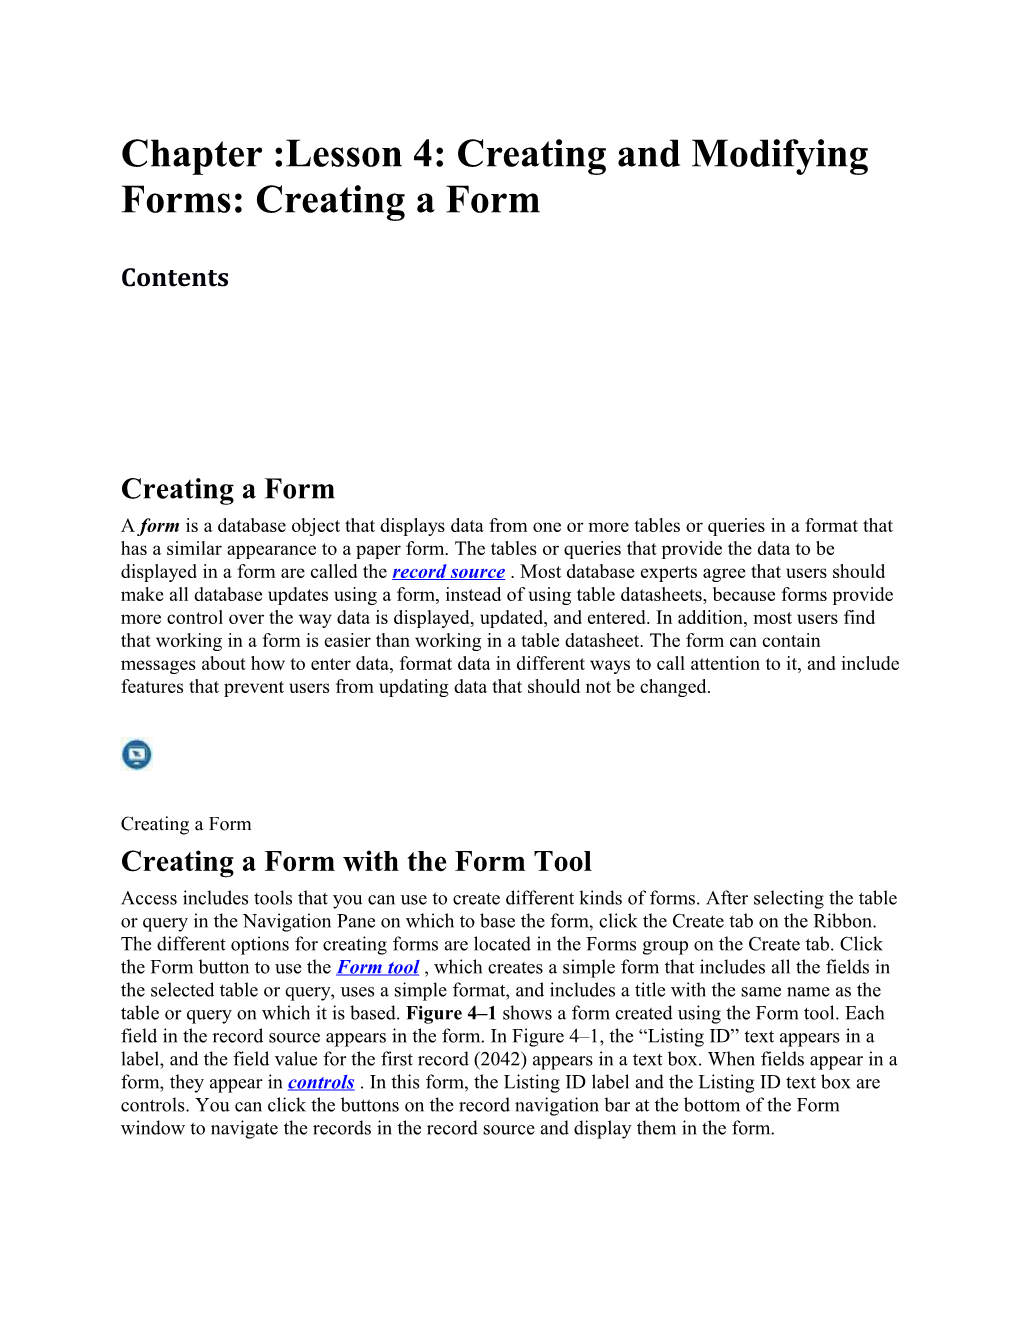 Chapter :Lesson 4: Creating and Modifying Forms:Creating a Form